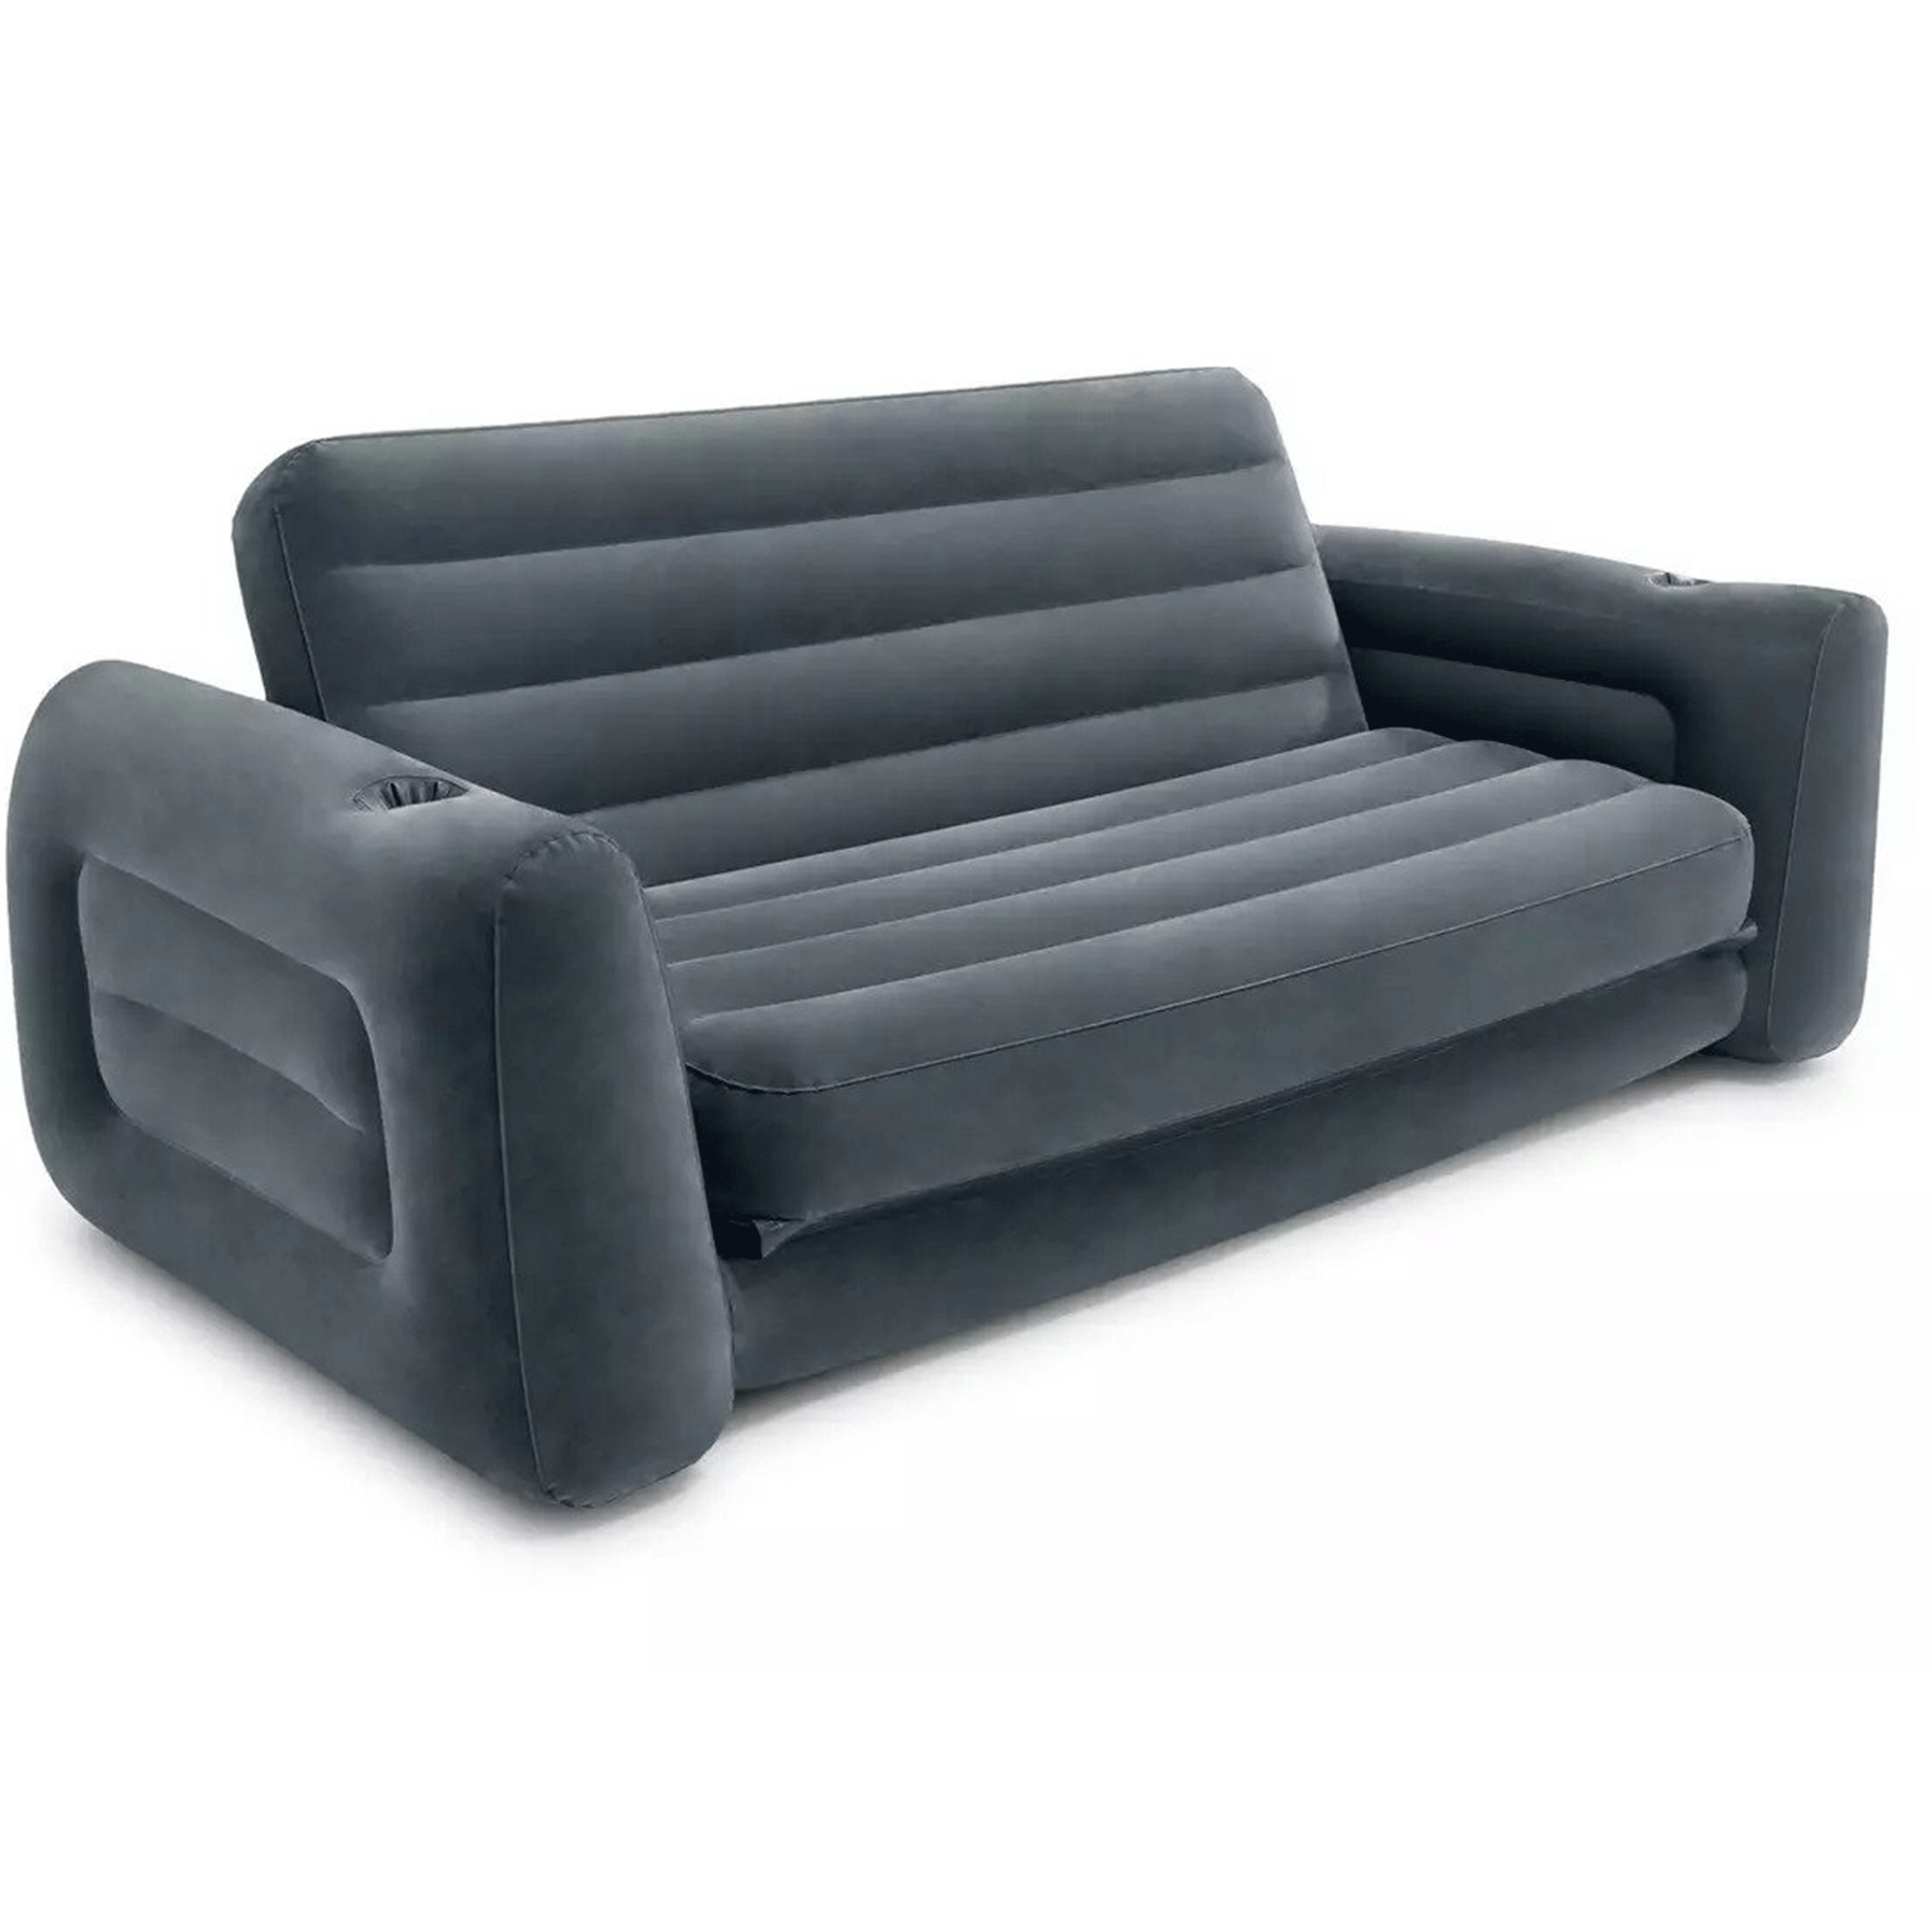 Inflatable sofa bed in grey